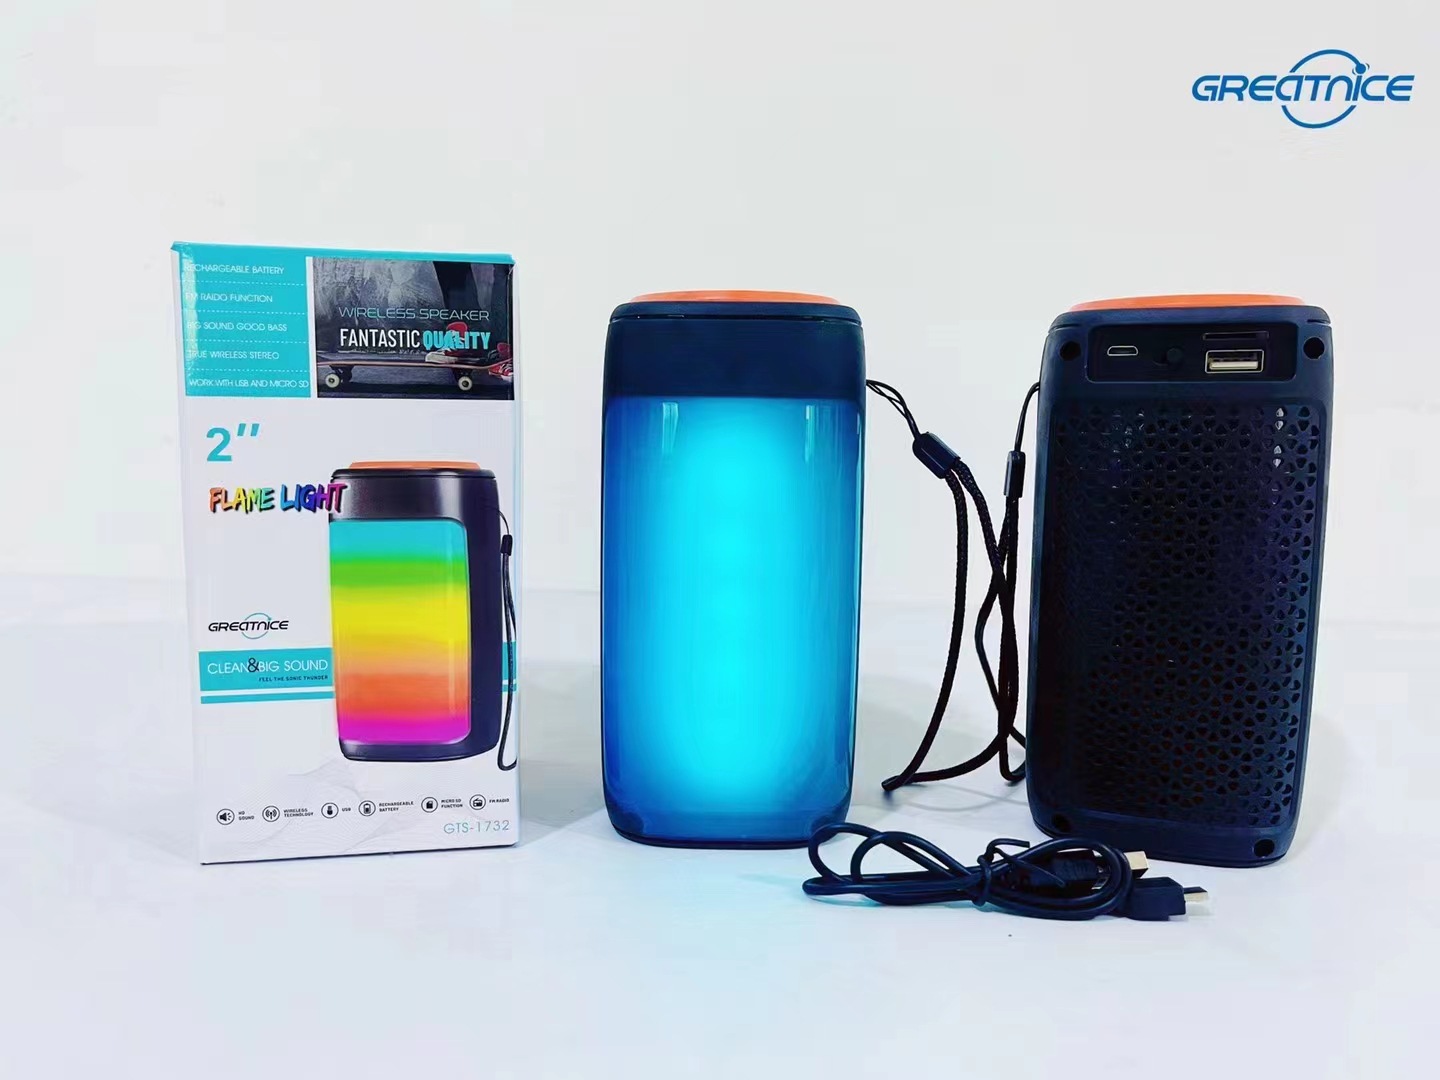 GTS-1732 Small Plug-in Colorful Lights Outdoor Portable Bluetooth Speaker